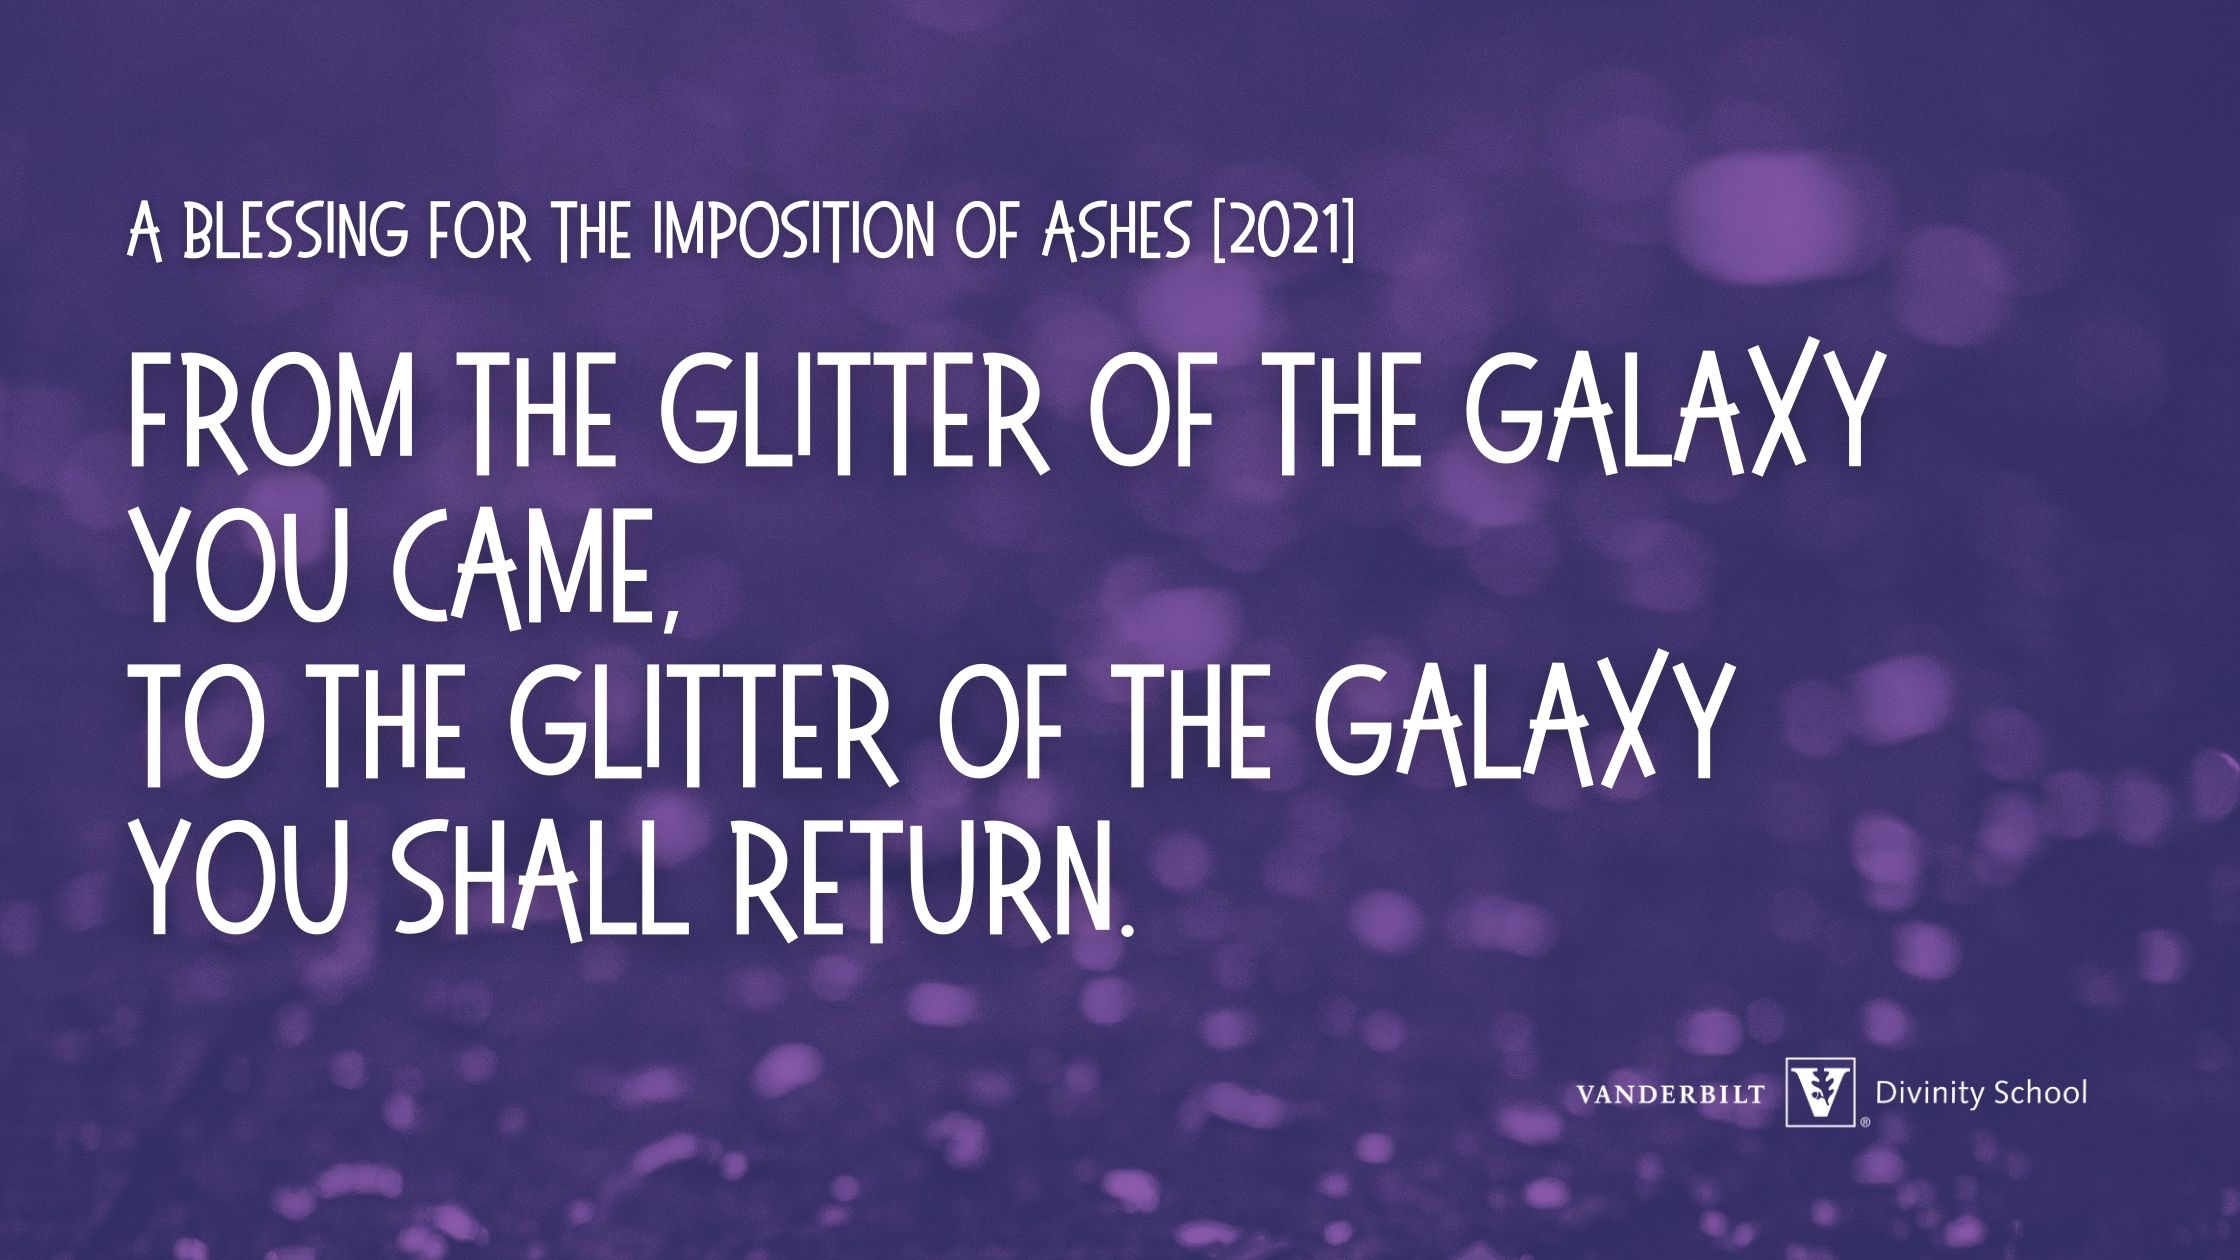 Purple toned glitter background with the text: From the glitter of the galaxy you came, to the glitter of the galaxy you shall return.